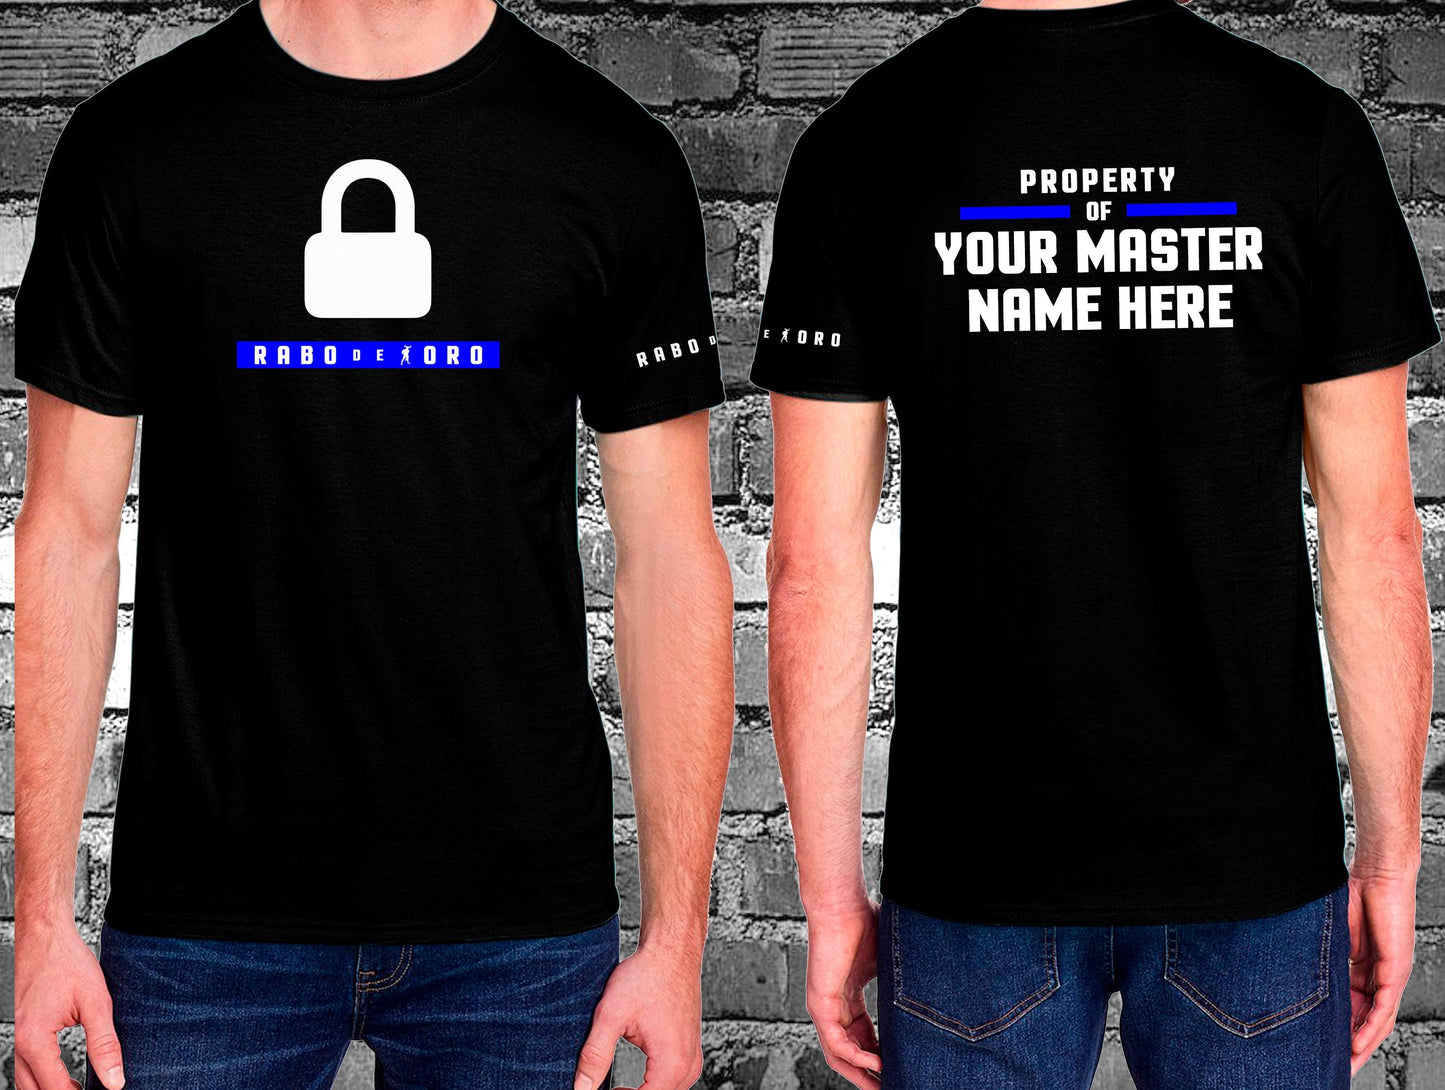 PROPERTY OF Double Sided Black T-Shirt with Padlock design & CUSTOM text